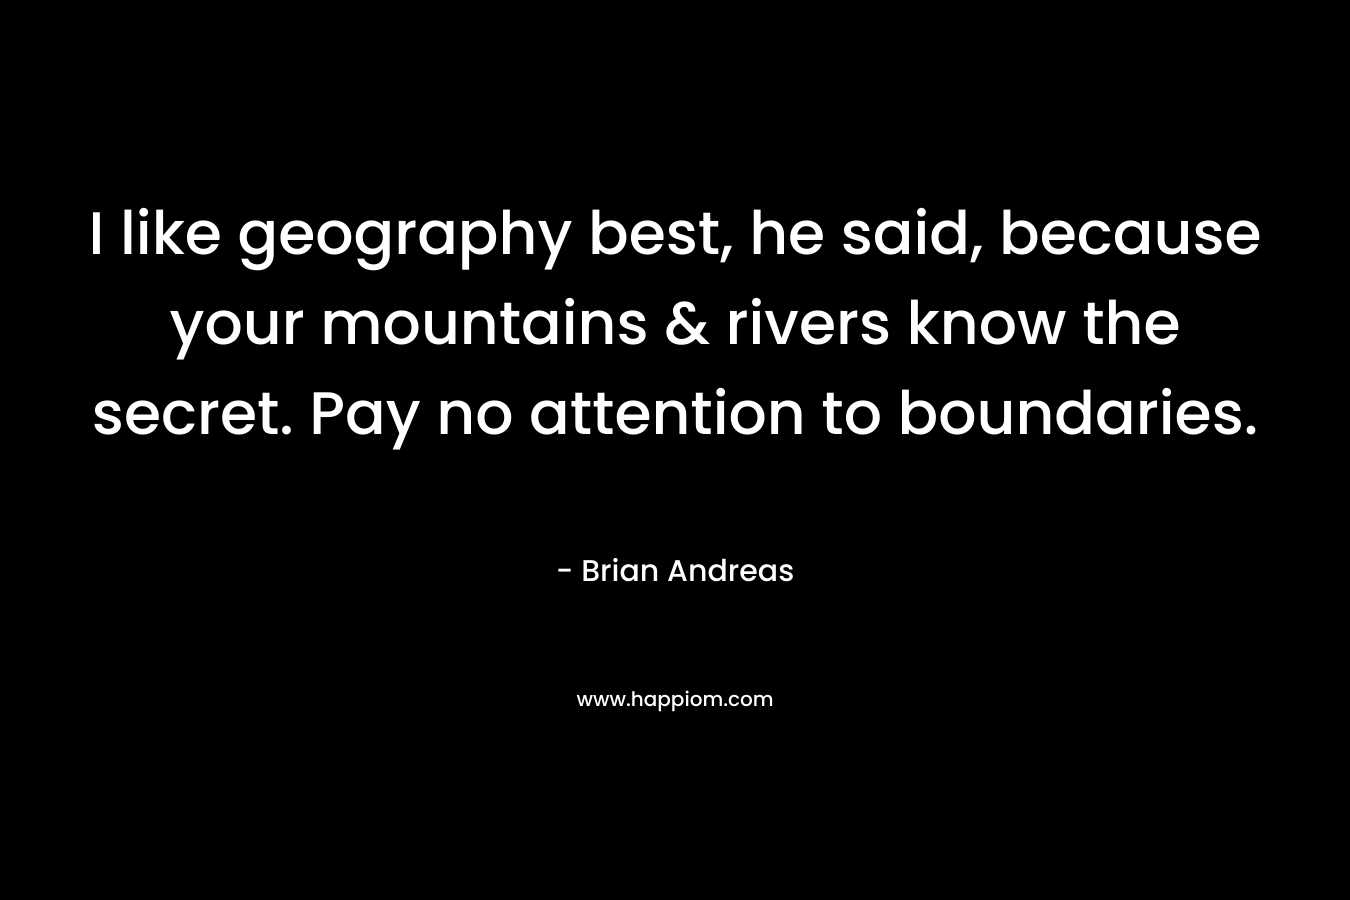 I like geography best, he said, because your mountains & rivers know the secret. Pay no attention to boundaries. – Brian Andreas